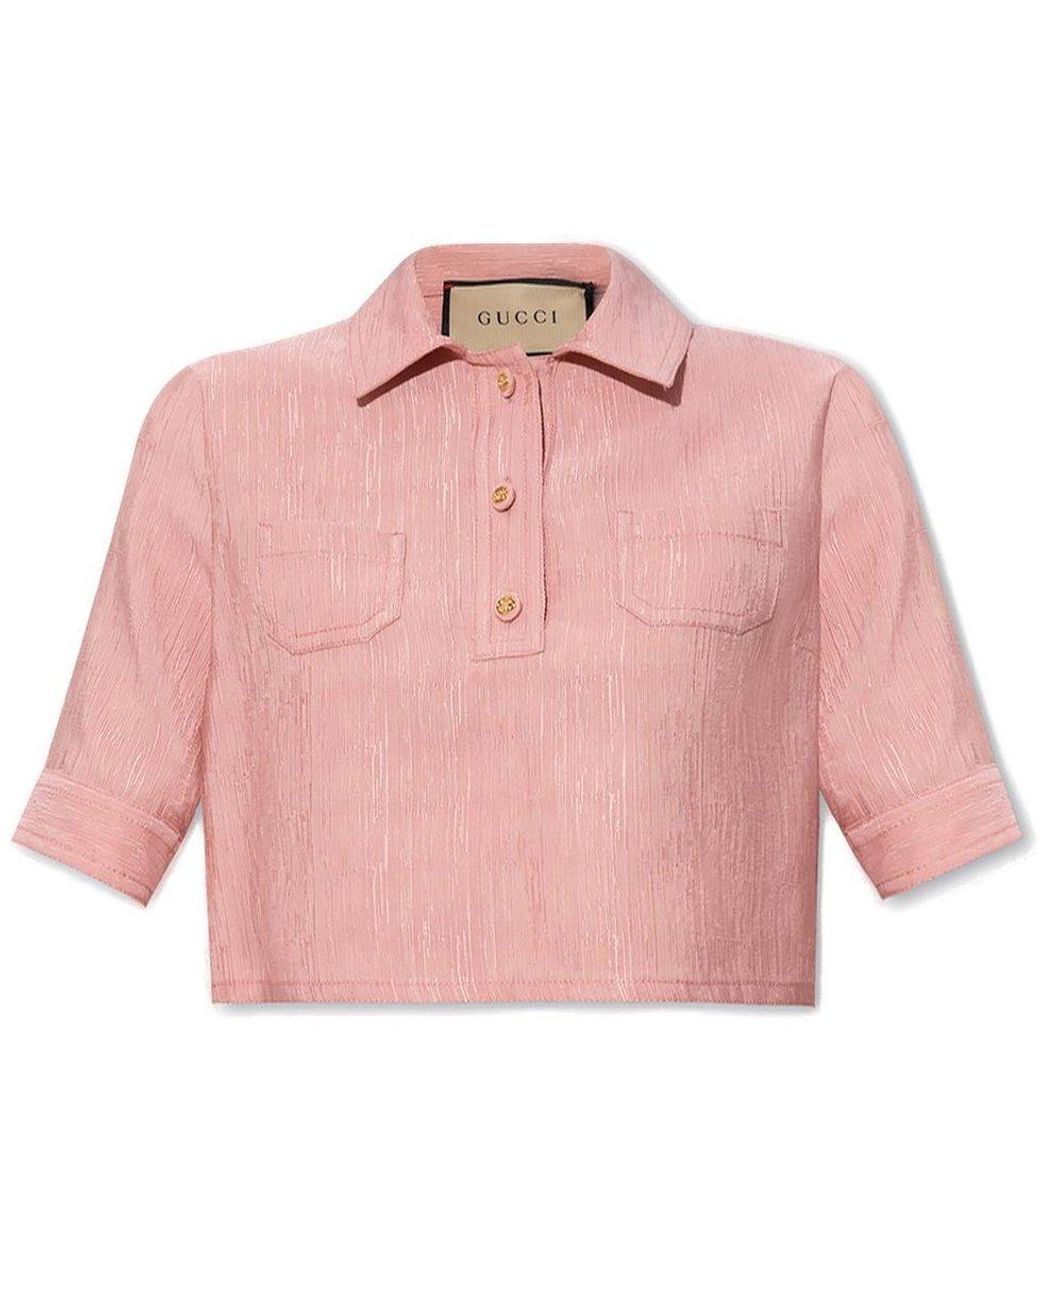 Gucci Button Detailed Cropped Top in Pink | Lyst